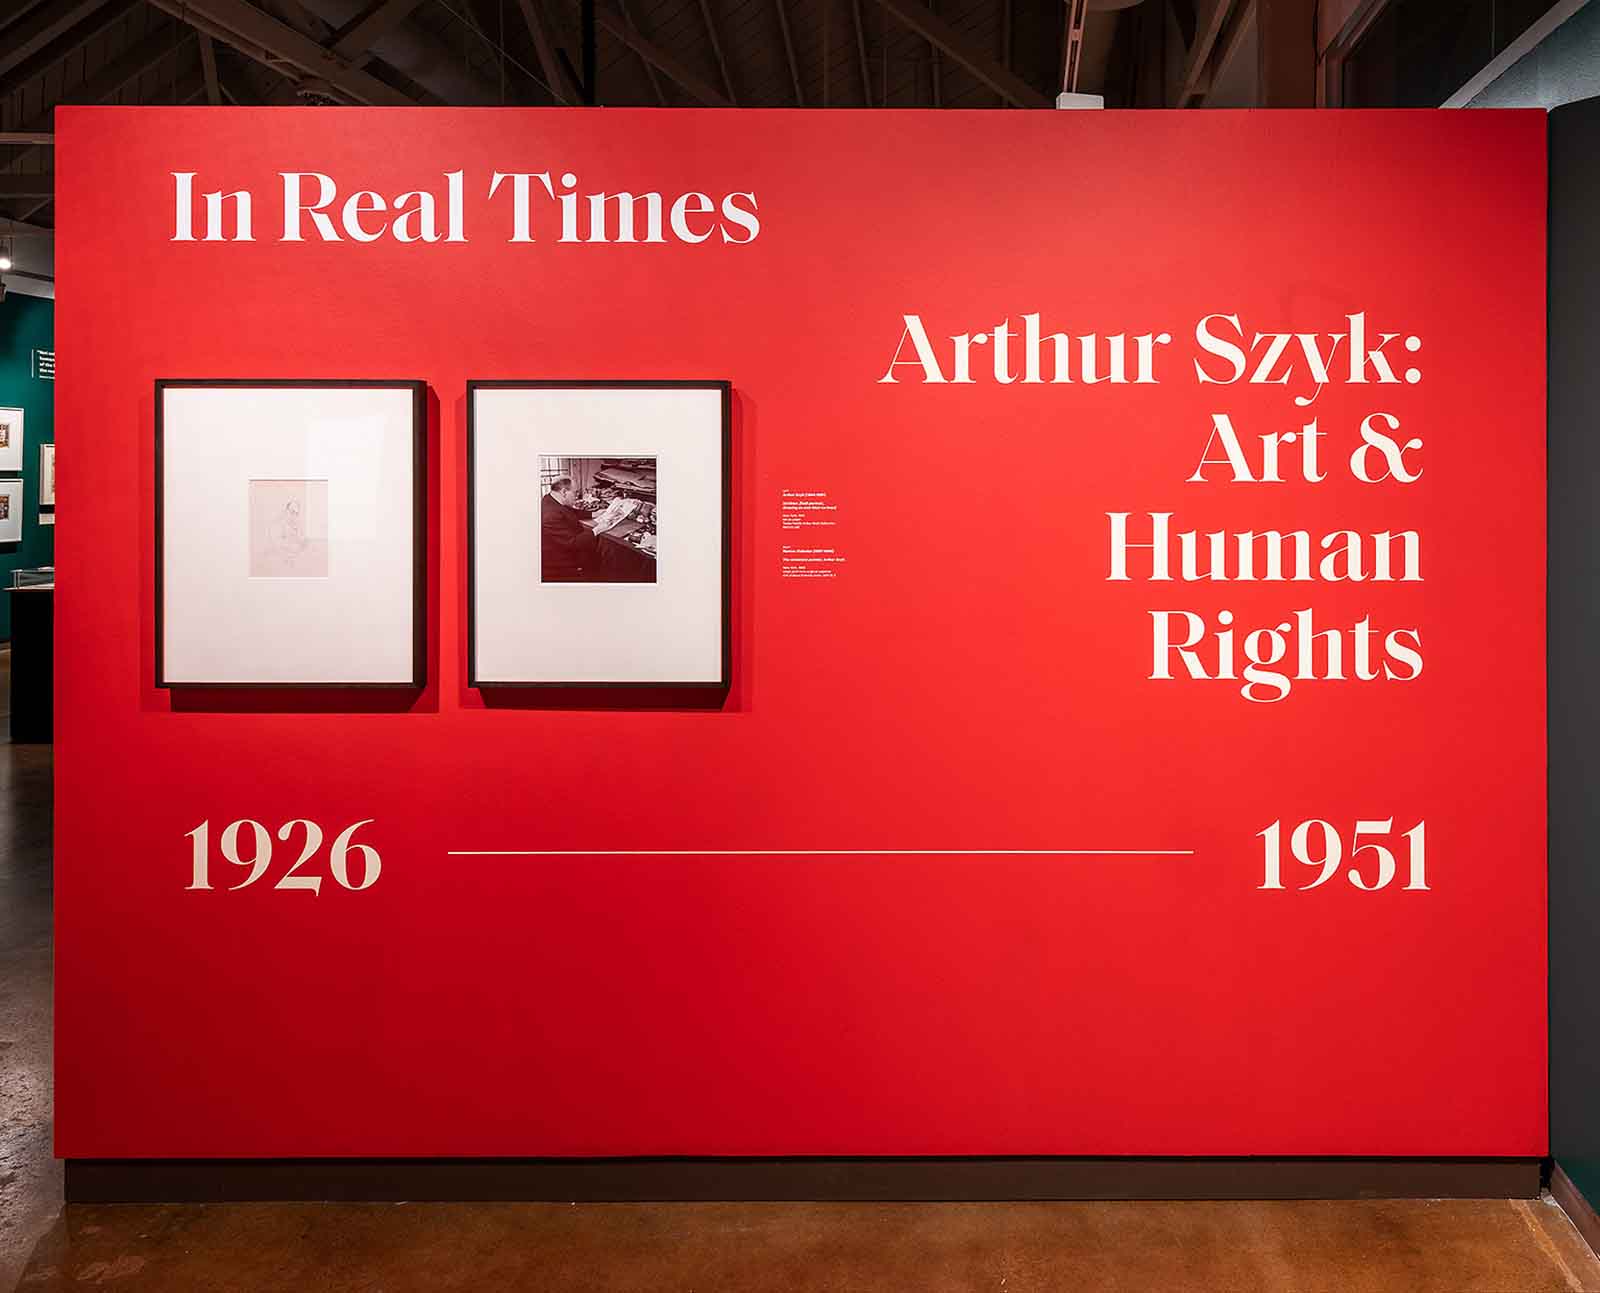 In Real Times: Arthur Szyk exhibition wall